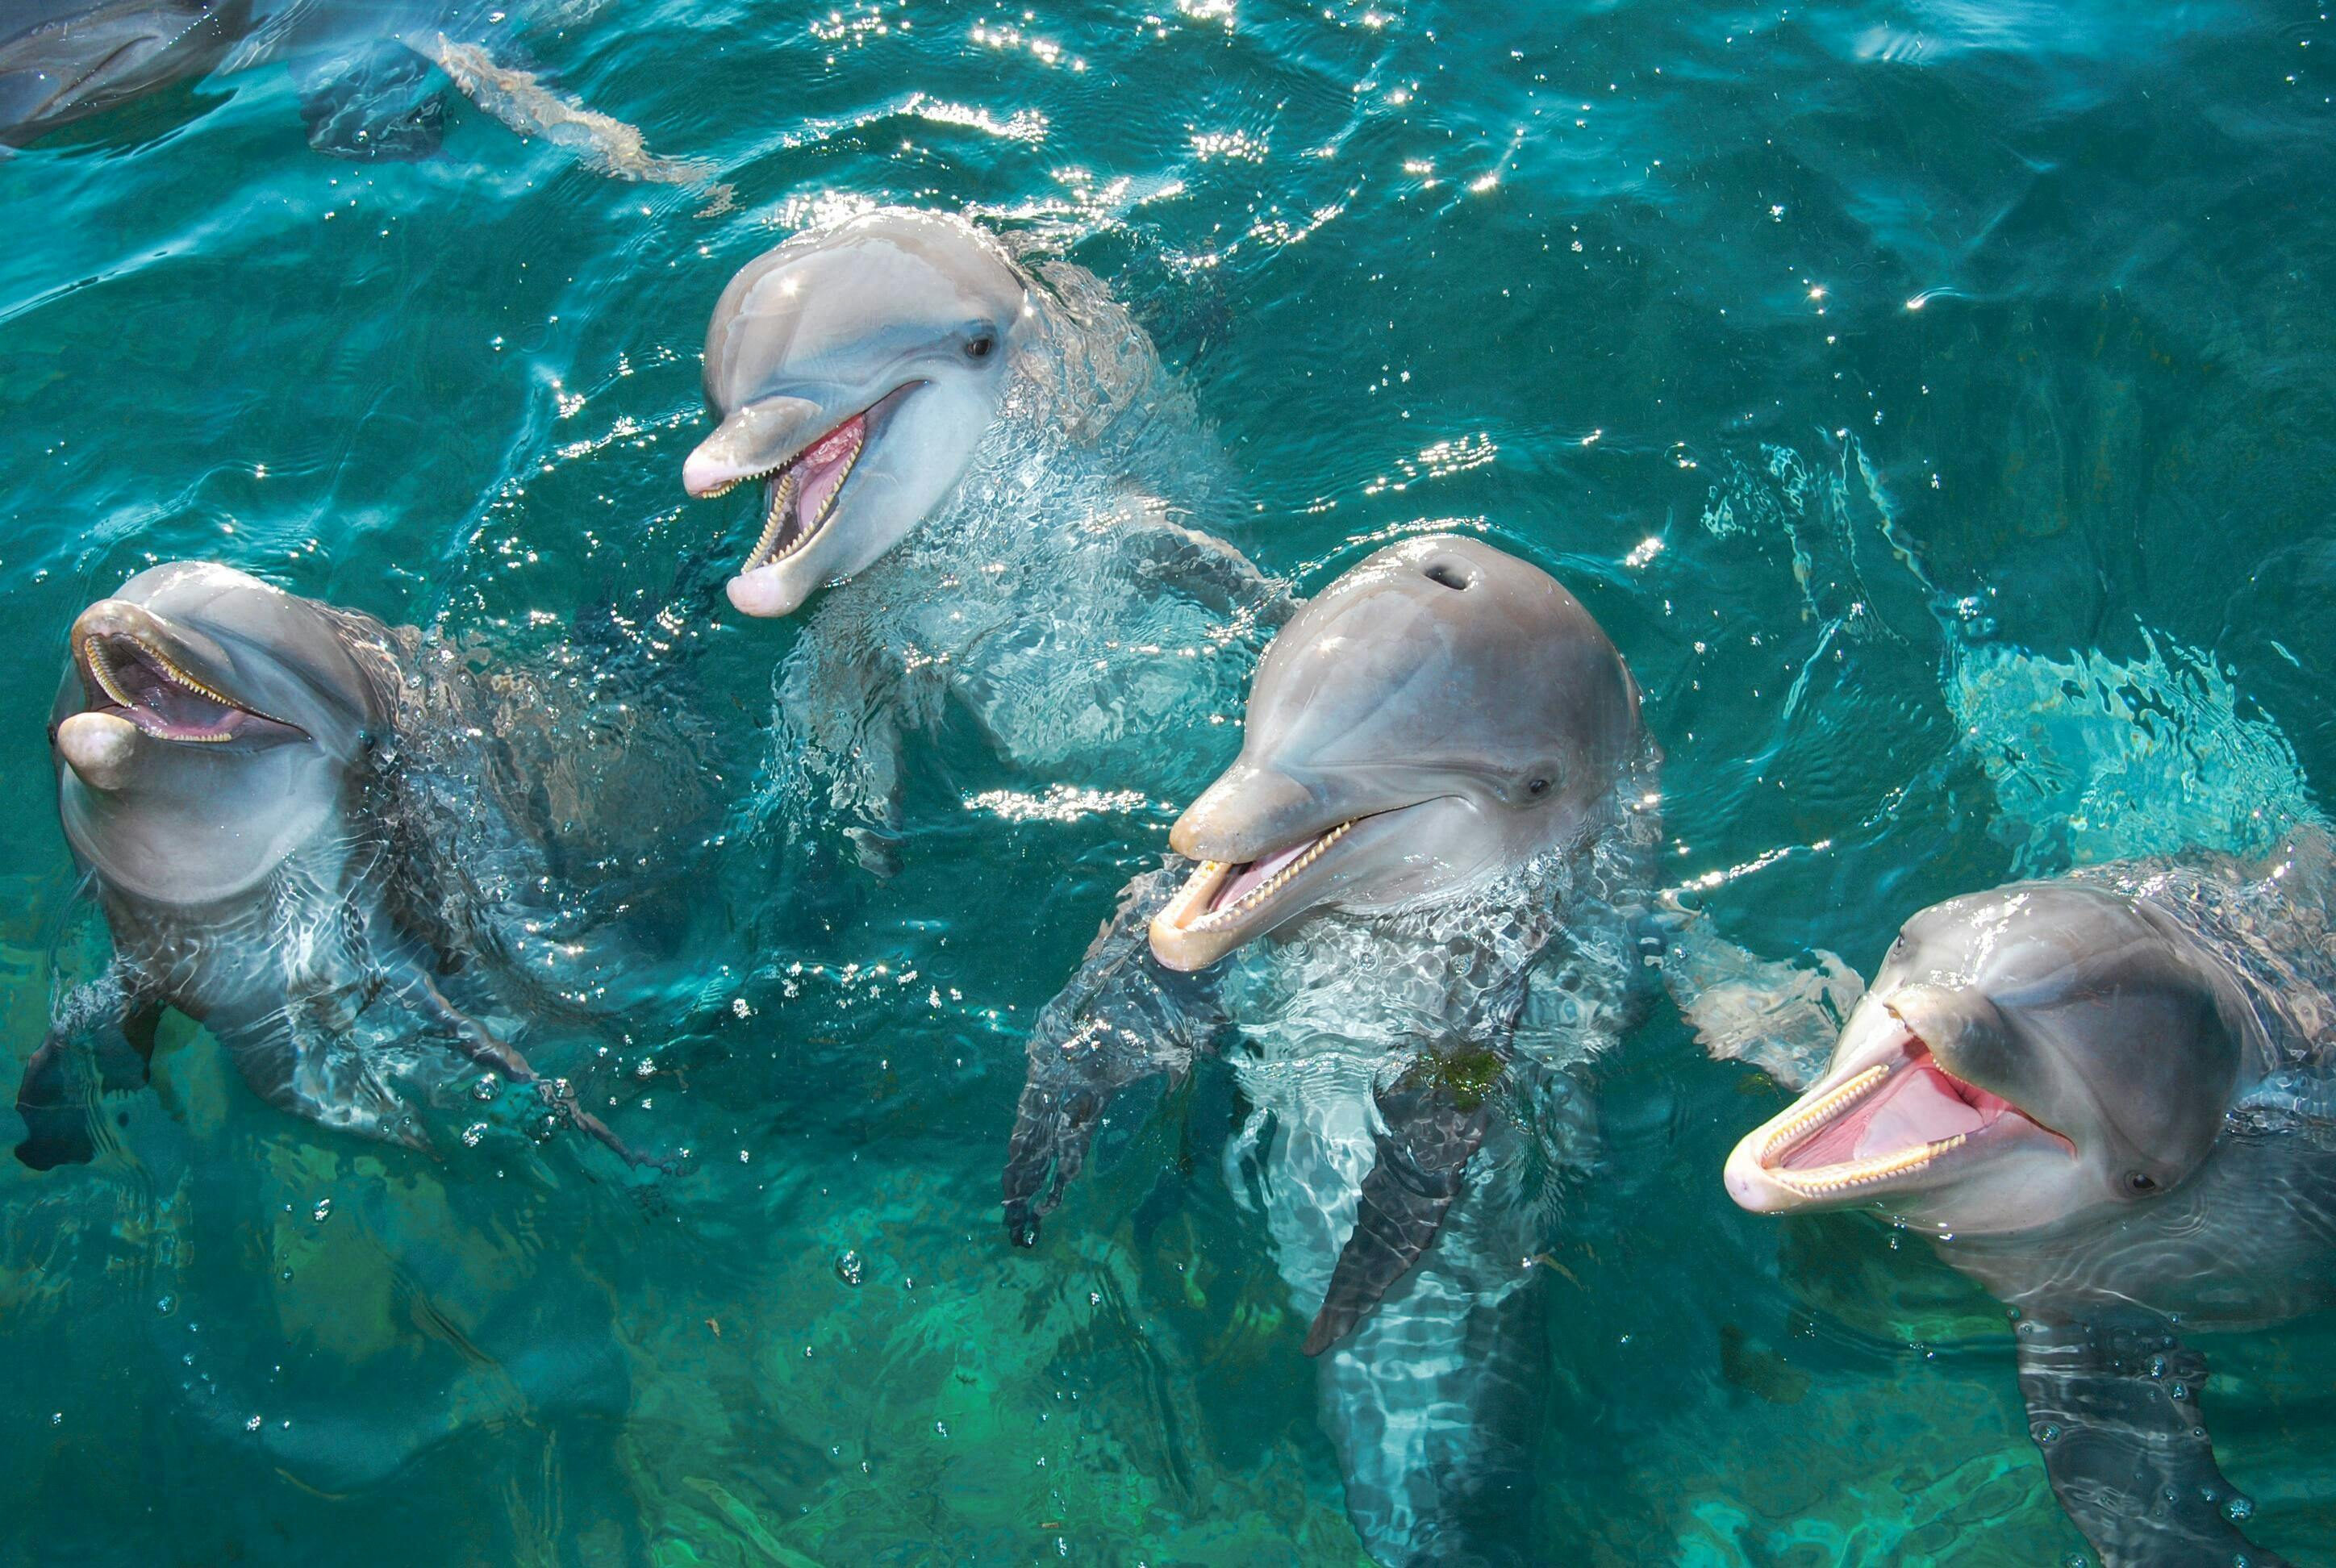 Delphinus Dolphin Experiences at Playa Mujeres Musement